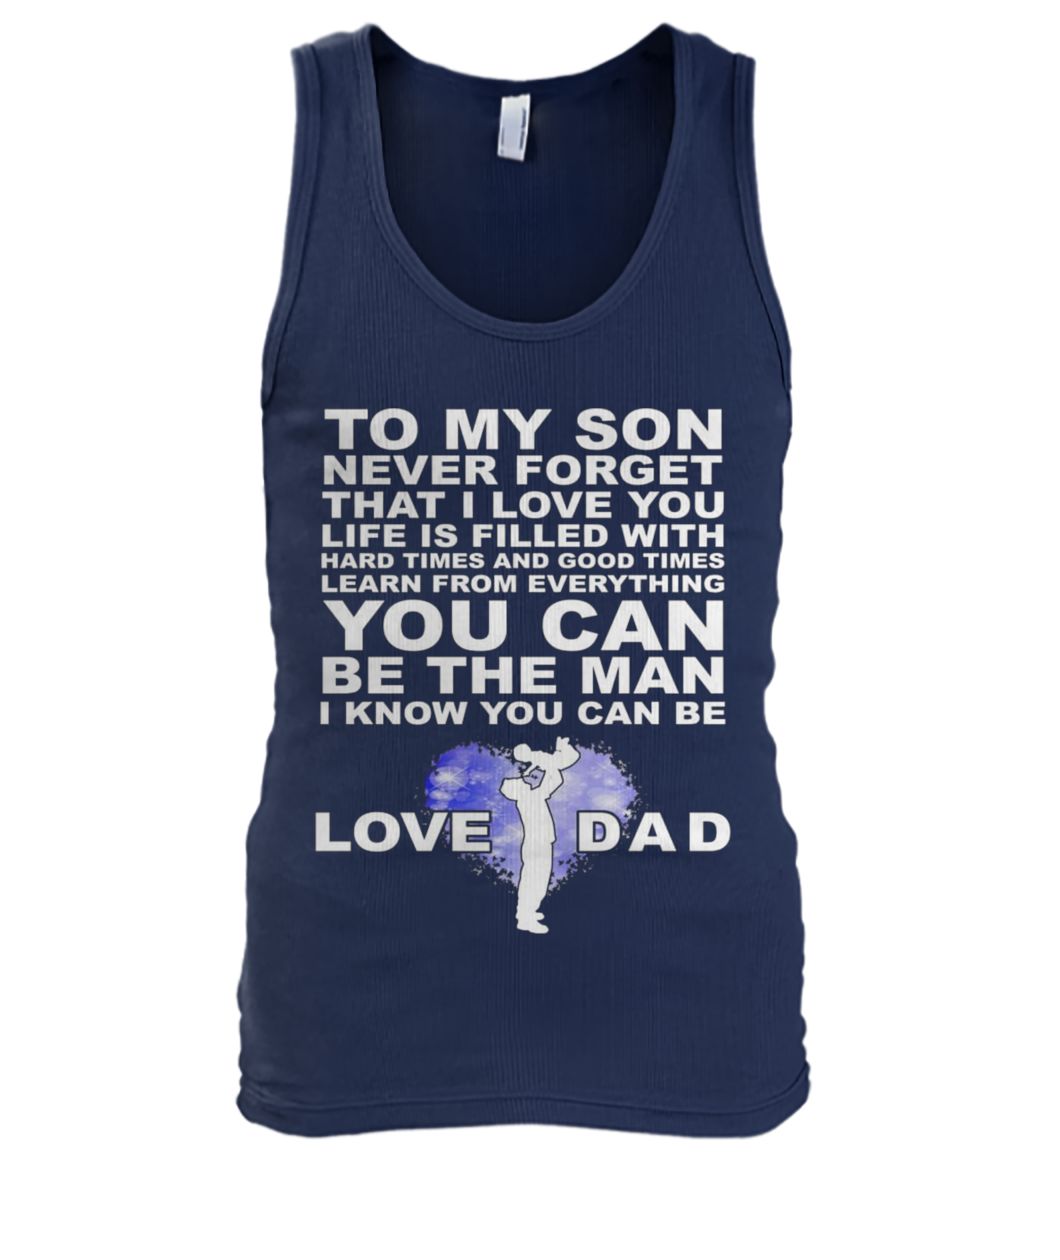 To my son never forget I love you love dad men's tank top